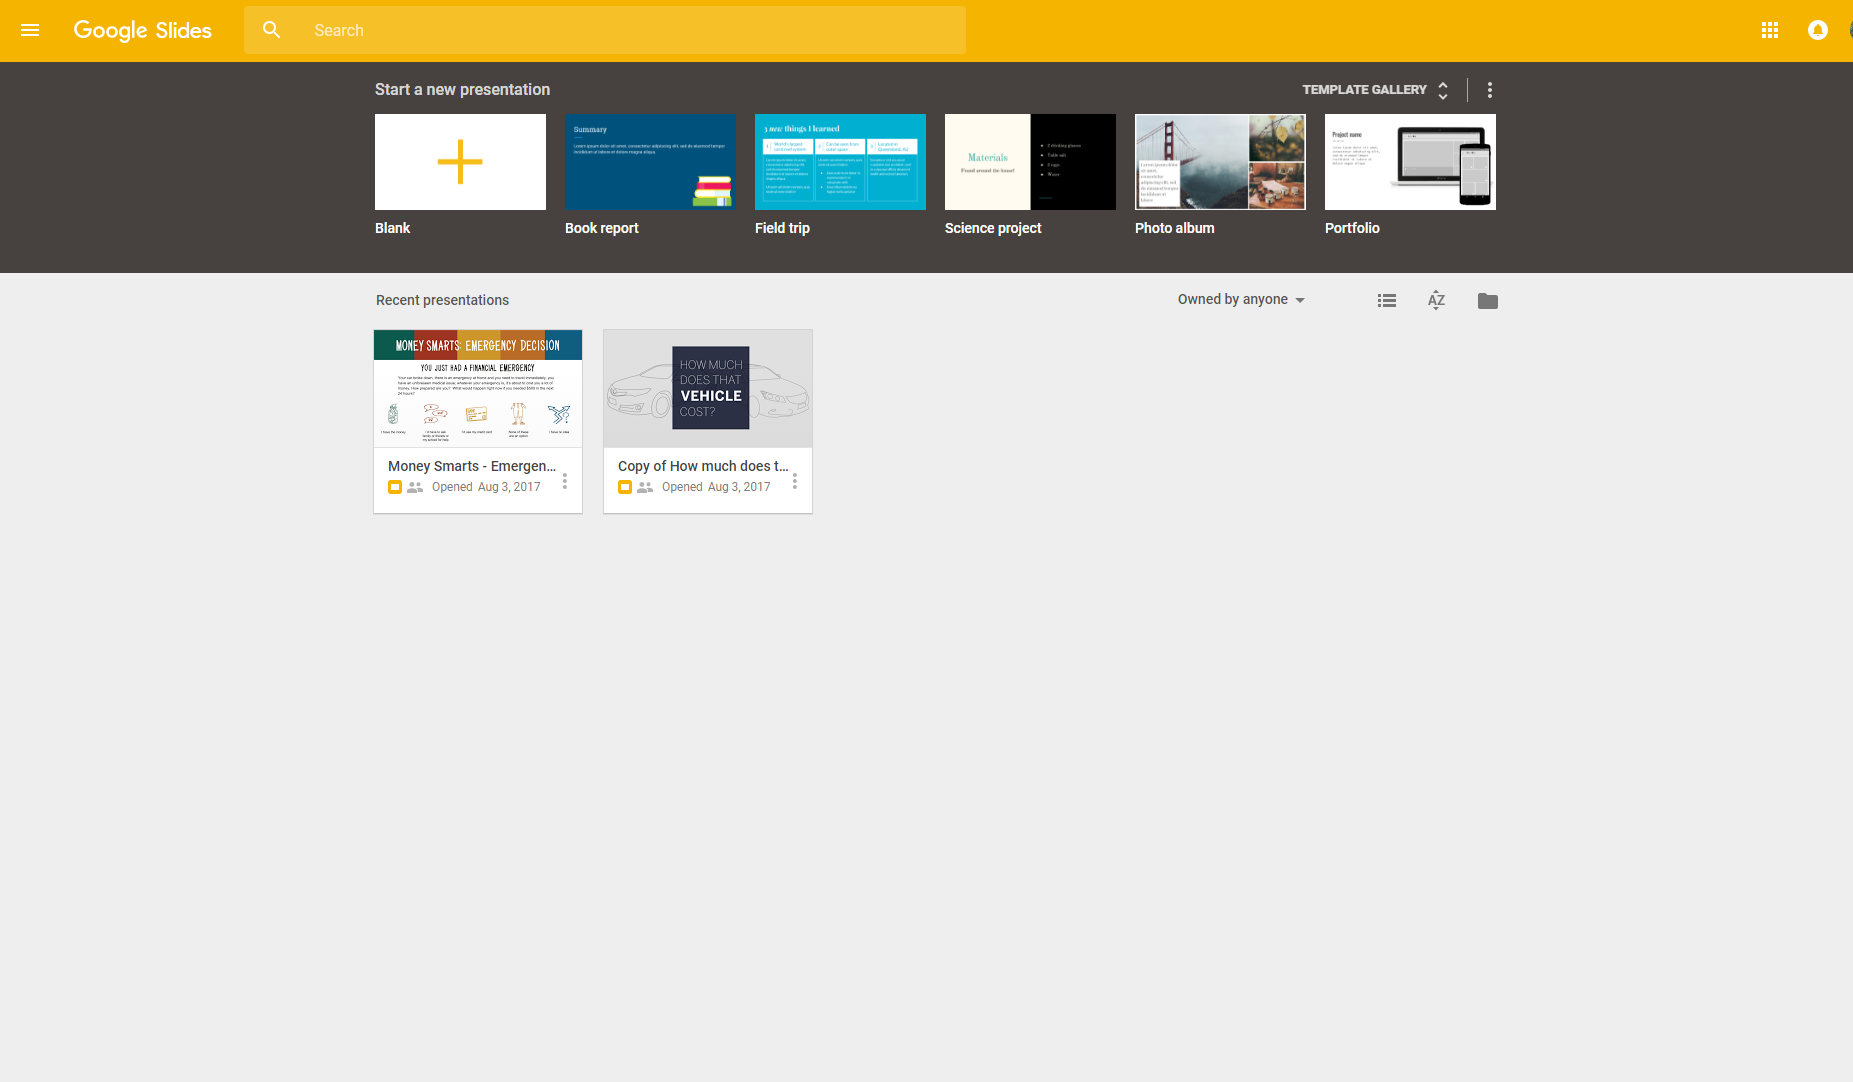 An image of a series of presentations saved and accessible in Google Slides.